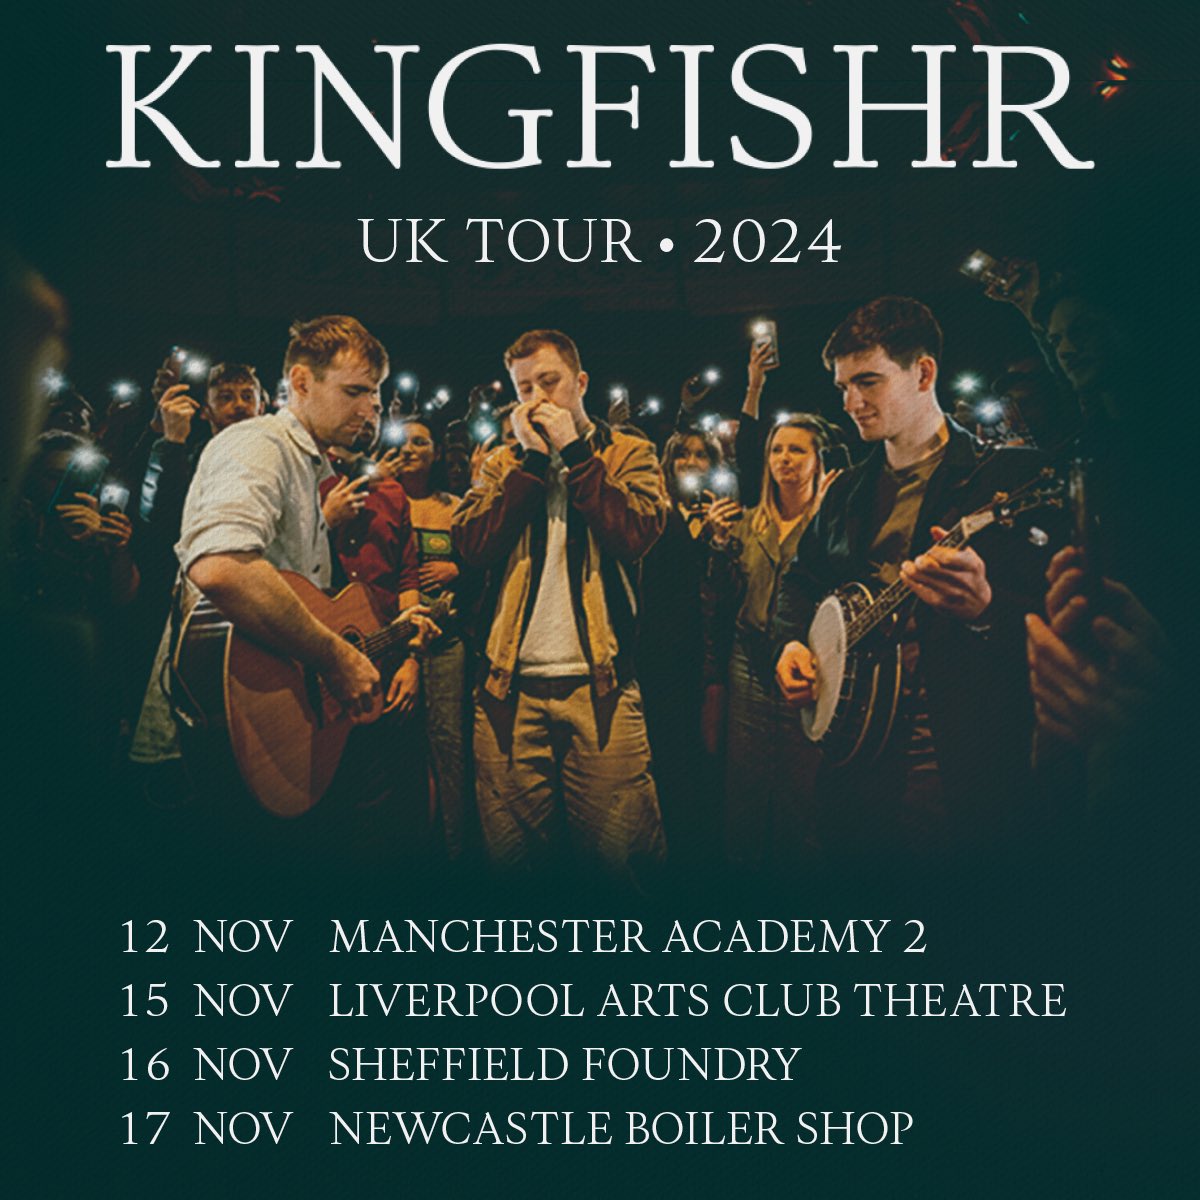 *NEW SHOW* Join us on Sunday 17 November, as we welcome @KingfishrBand. They quickly established themselves as one of the rising prospects in Irish music, racking up over 10 million Spotify streams to date.   On sale Friday 26 April at 10am: bit.ly/4b7tp35